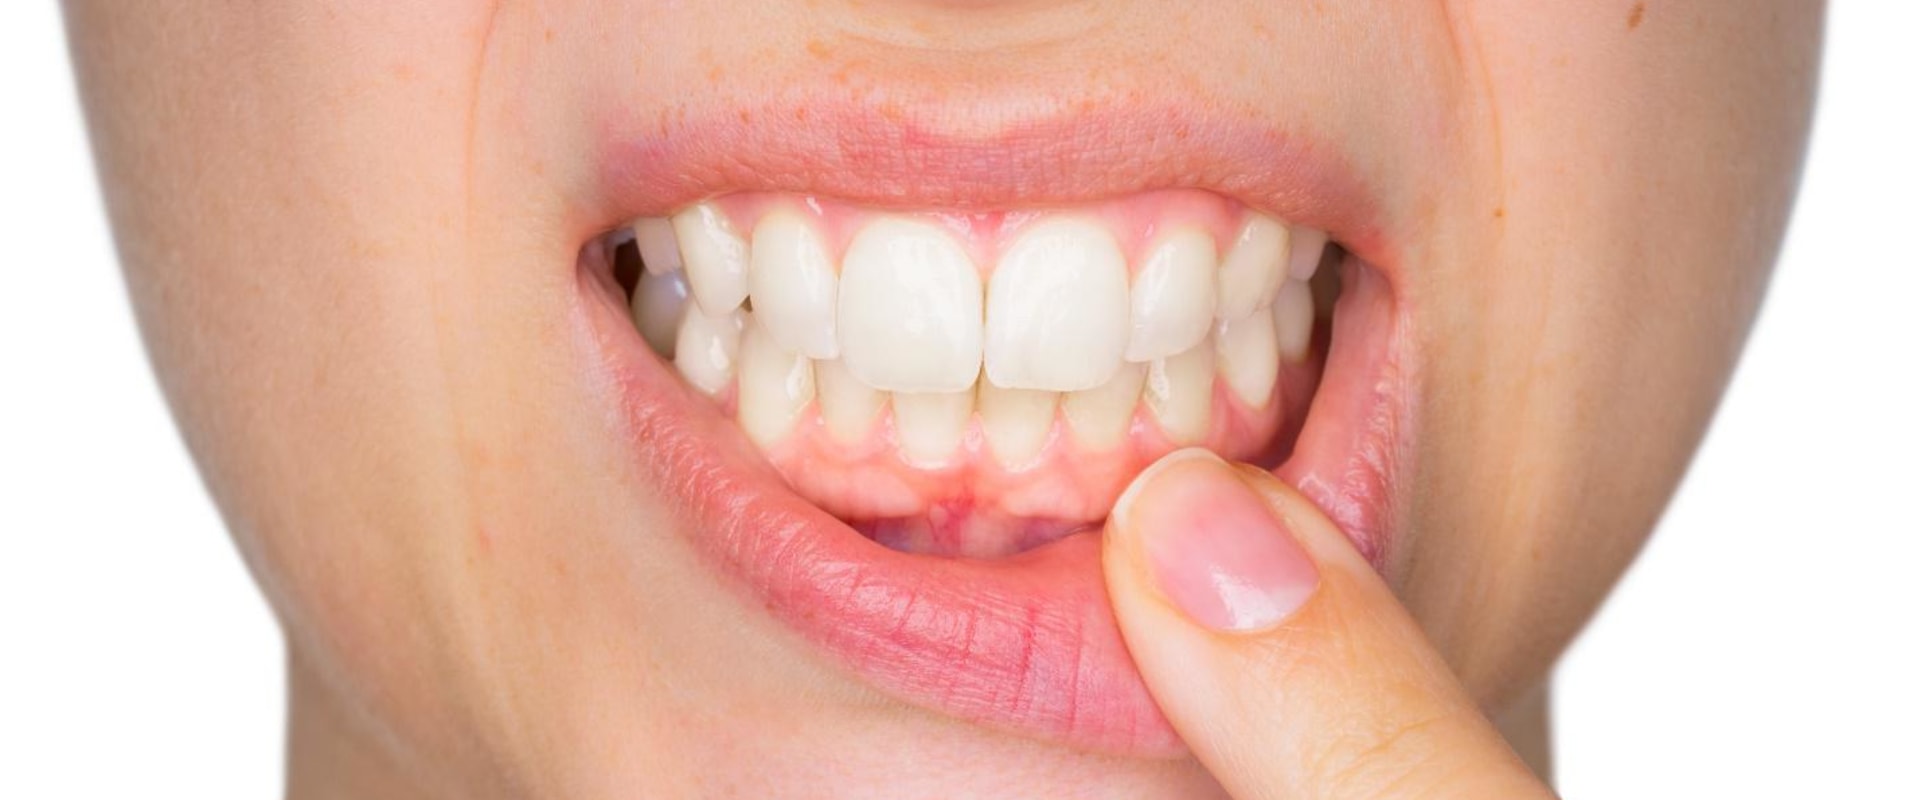 Can gum health be restored?